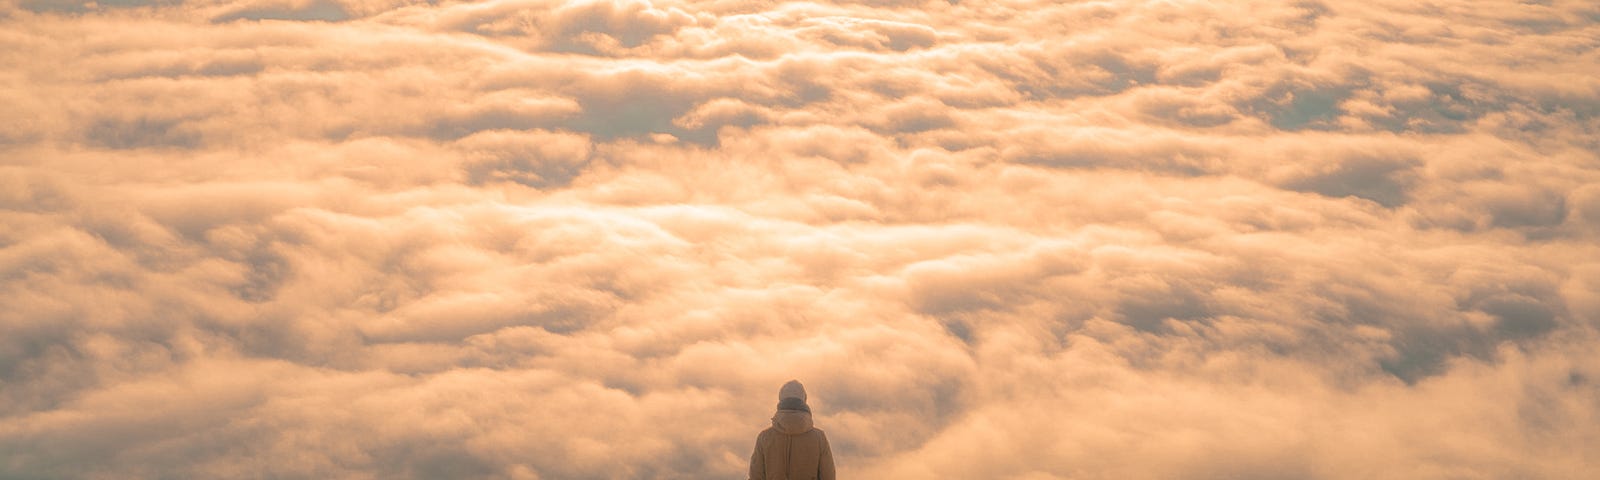 A person stands on the summit of a mountain, a ways off from the camera, looking out over a sea of clouds just below the mountain’s peak, with mountaintops rising through the clouds off in the distance.